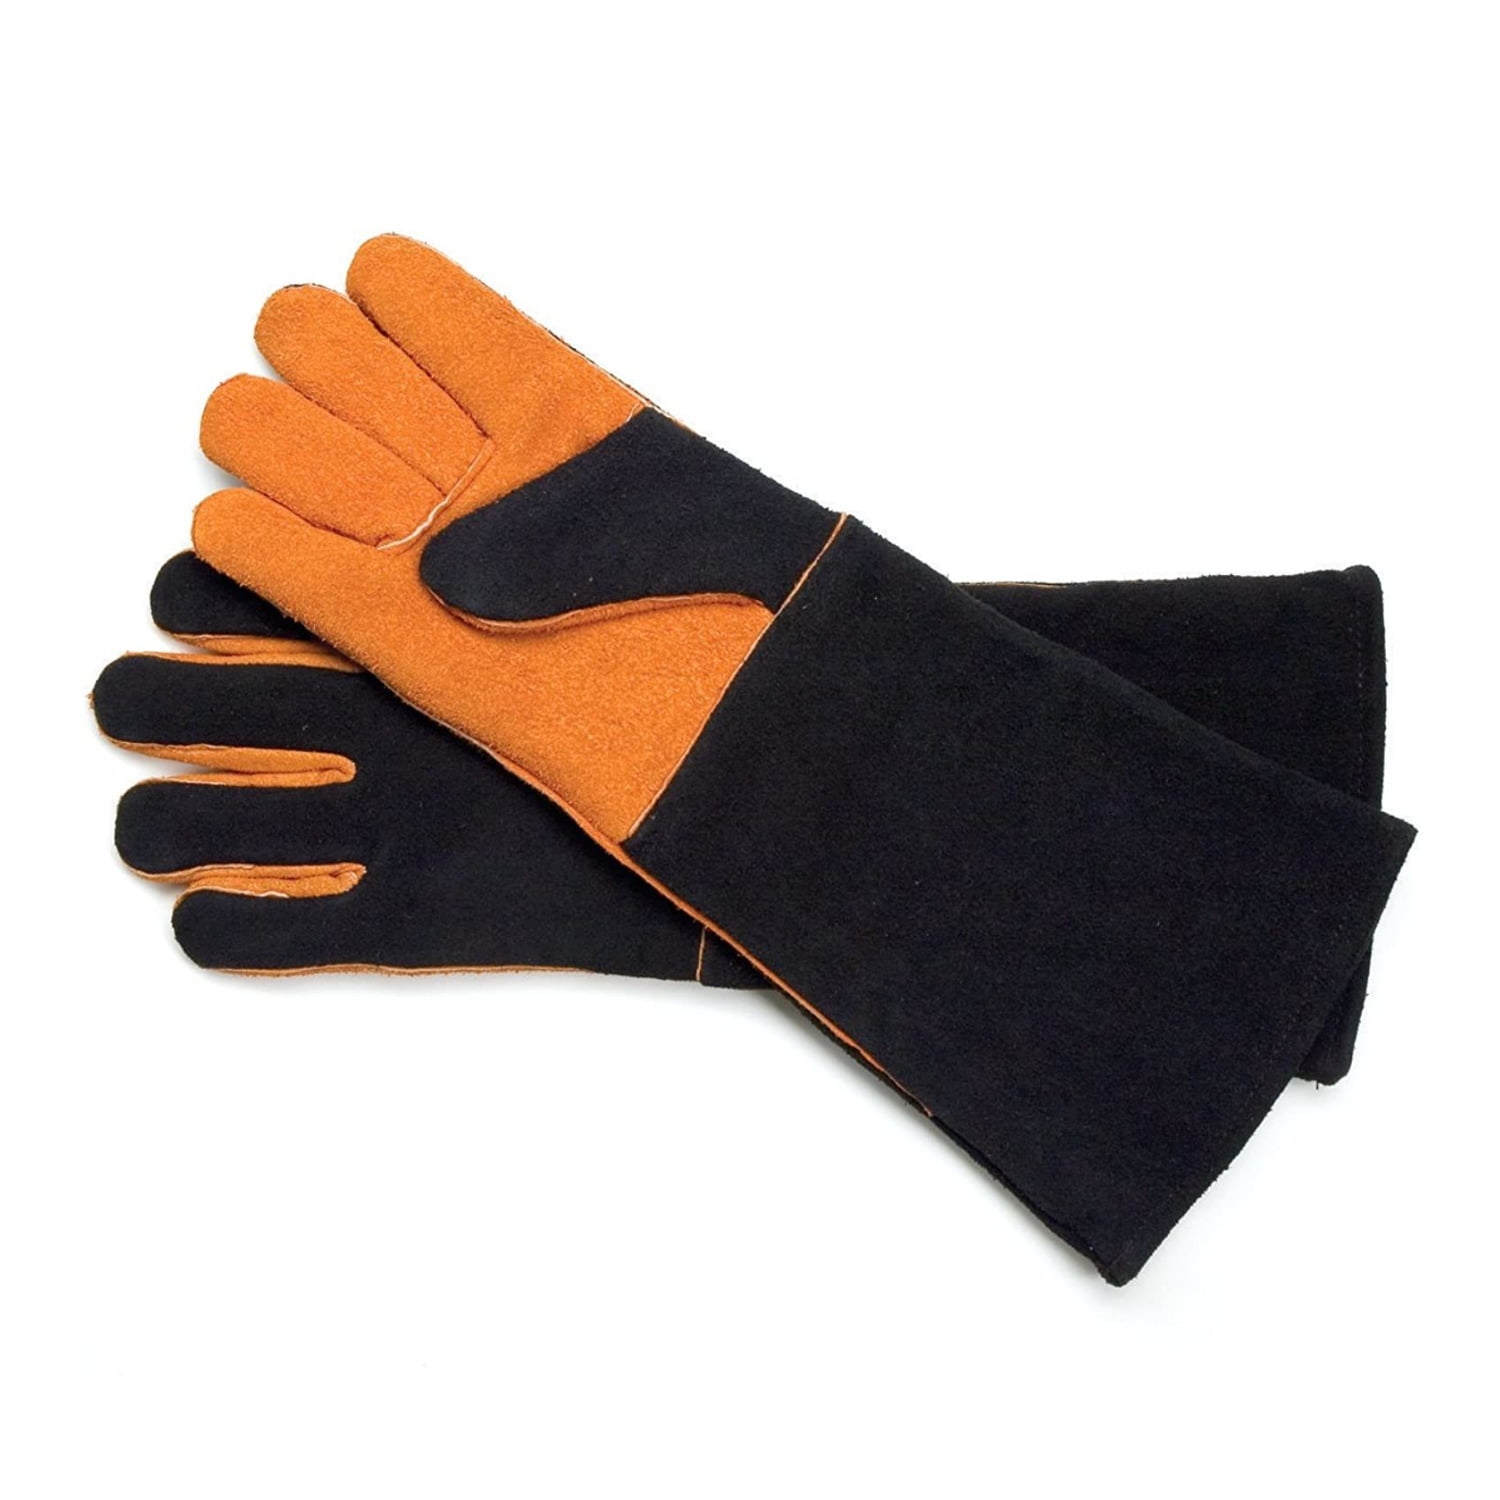 G & F 8115 Premium Grain Leather Gloves, BBQ gloves, Grill Gloves,, Cotton  lining with 14.5-Inch Extra Long Sleeve Heat Resistant Gloves - Walmart.com